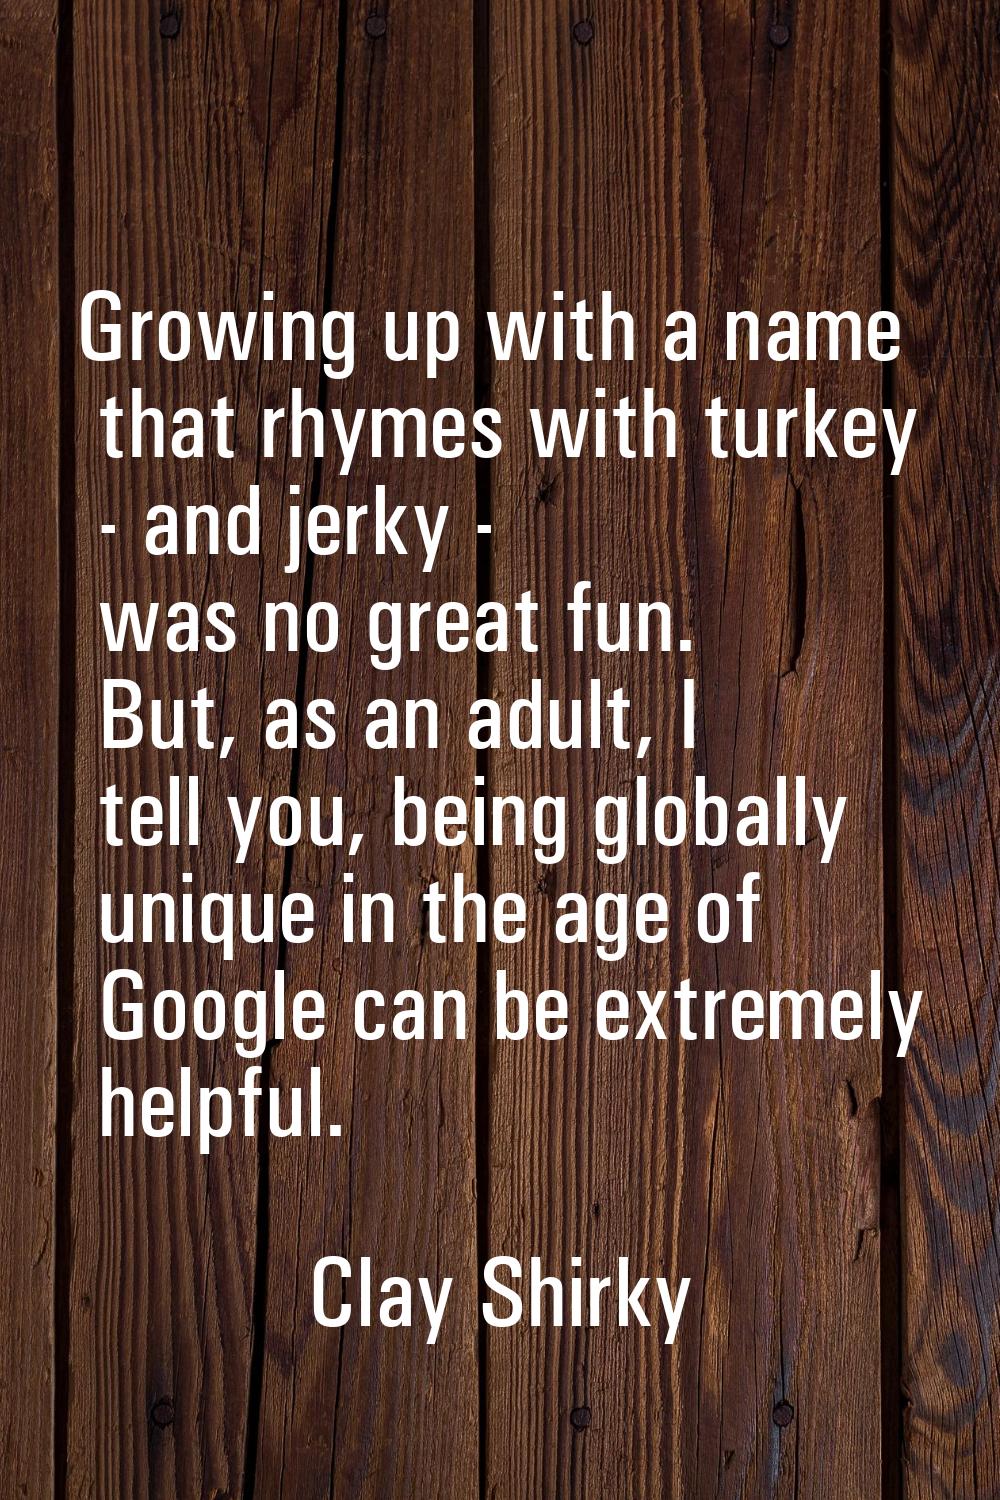 Growing up with a name that rhymes with turkey - and jerky - was no great fun. But, as an adult, I 